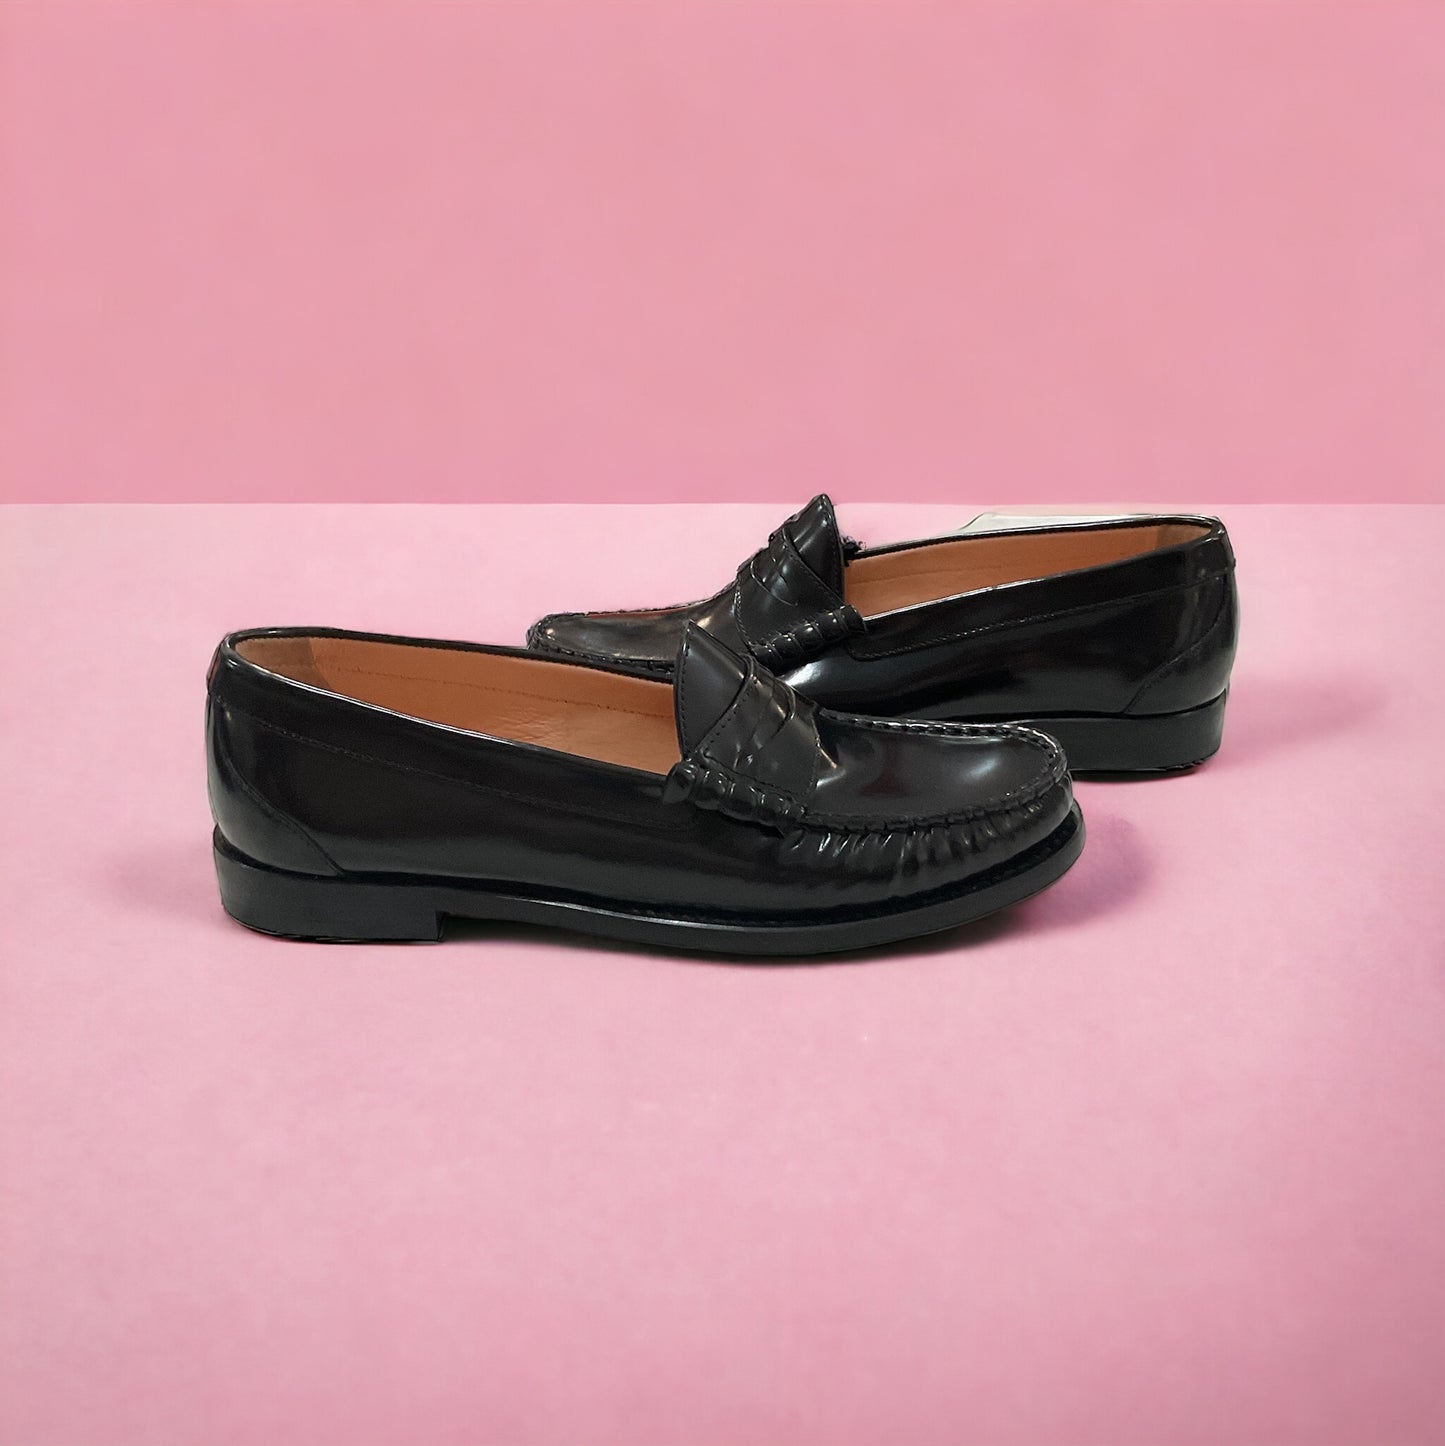 J. Crew Size 7.5 New Black Loafers